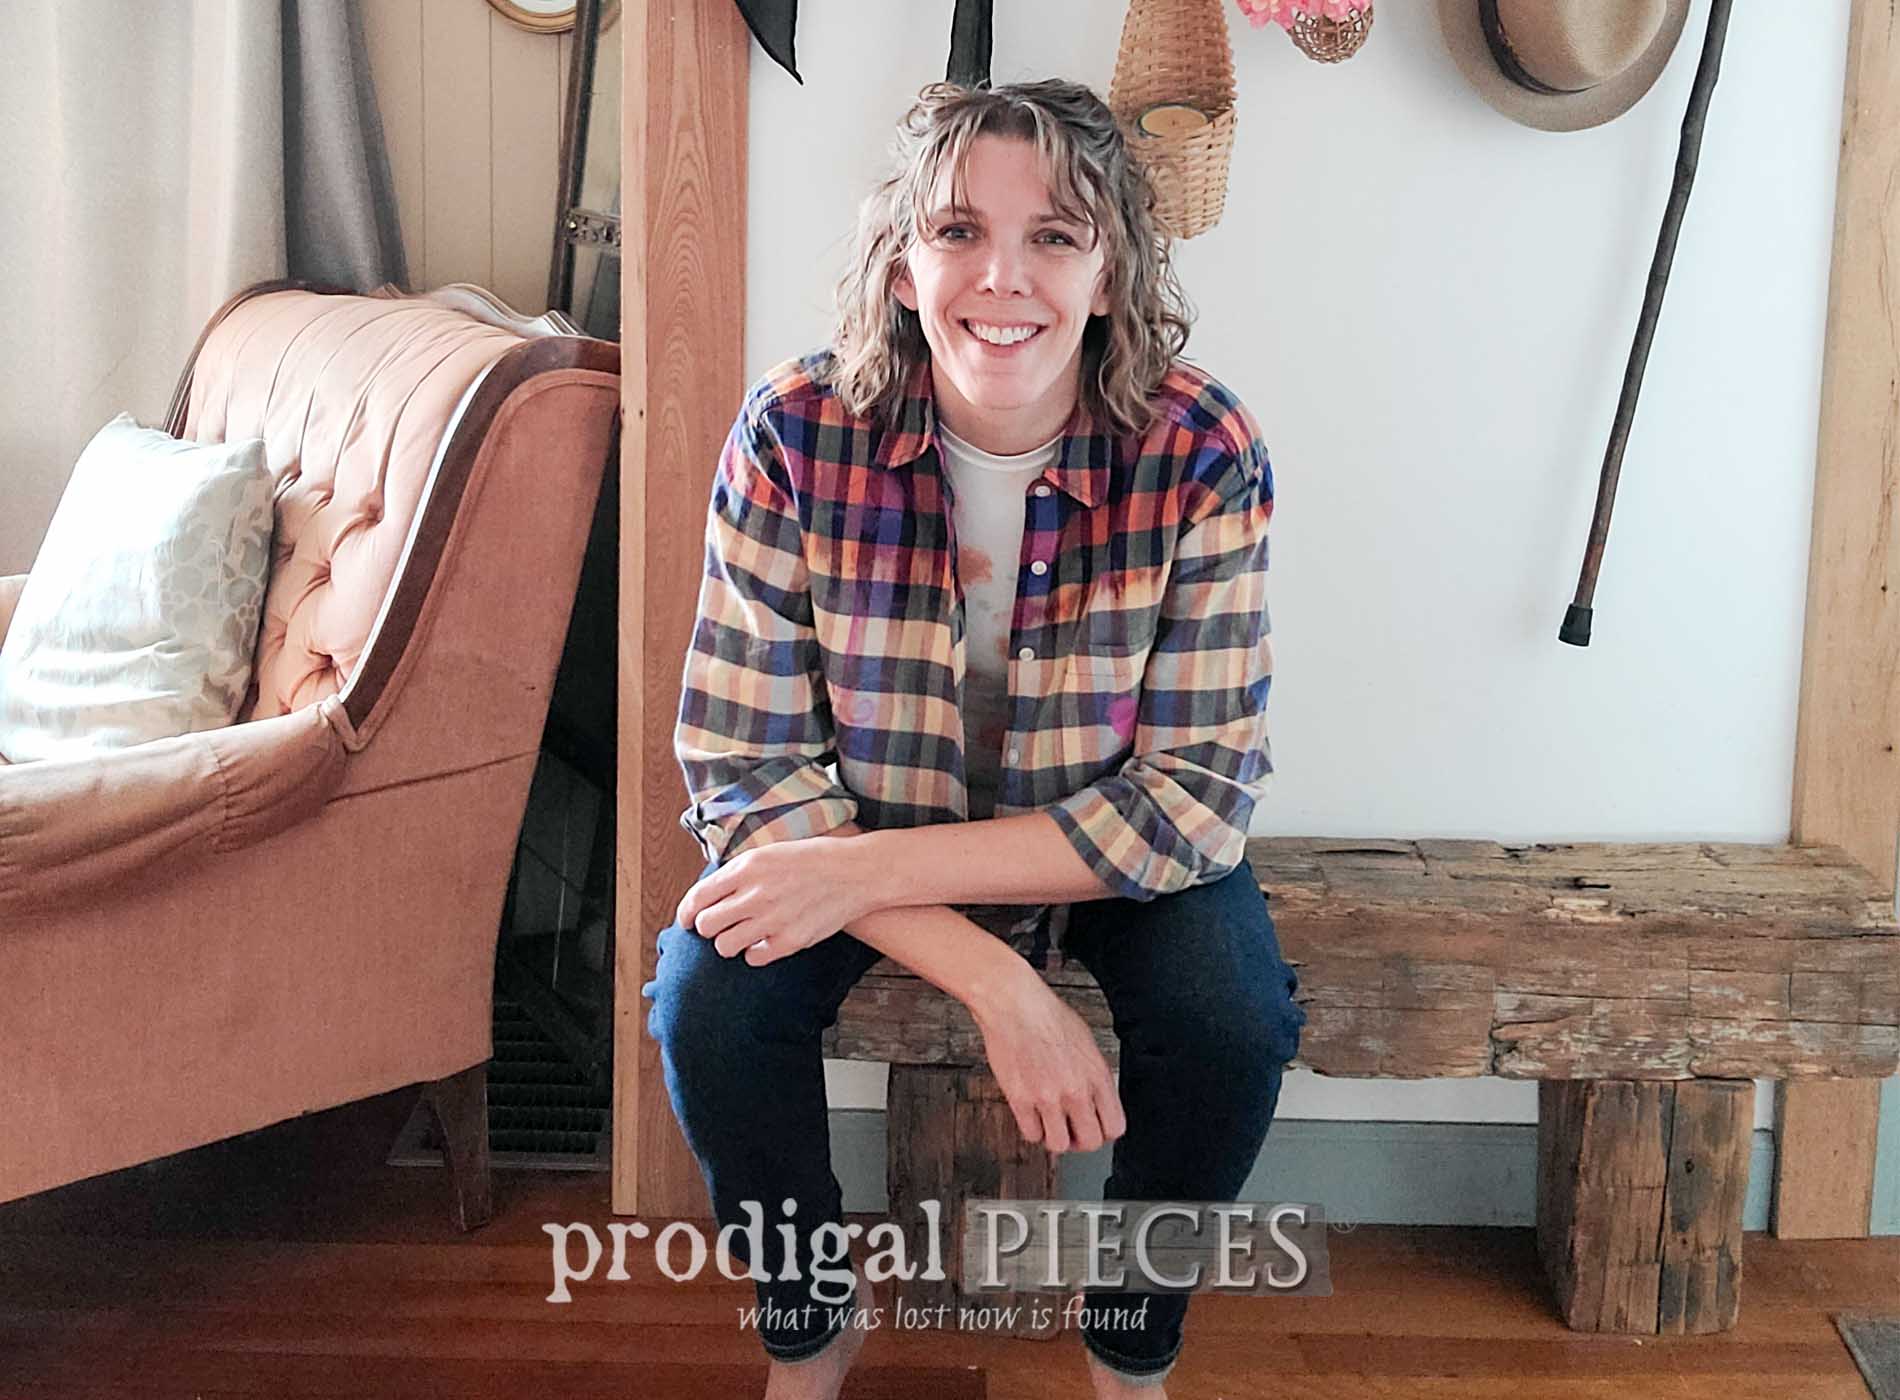 Take that old, damaged, or thrifted shirt and make it your own with super-easy and fun bleached shirt tutorial by Larissa of Prodigal Pieces | prodigalpieces.com #prodigalpieces